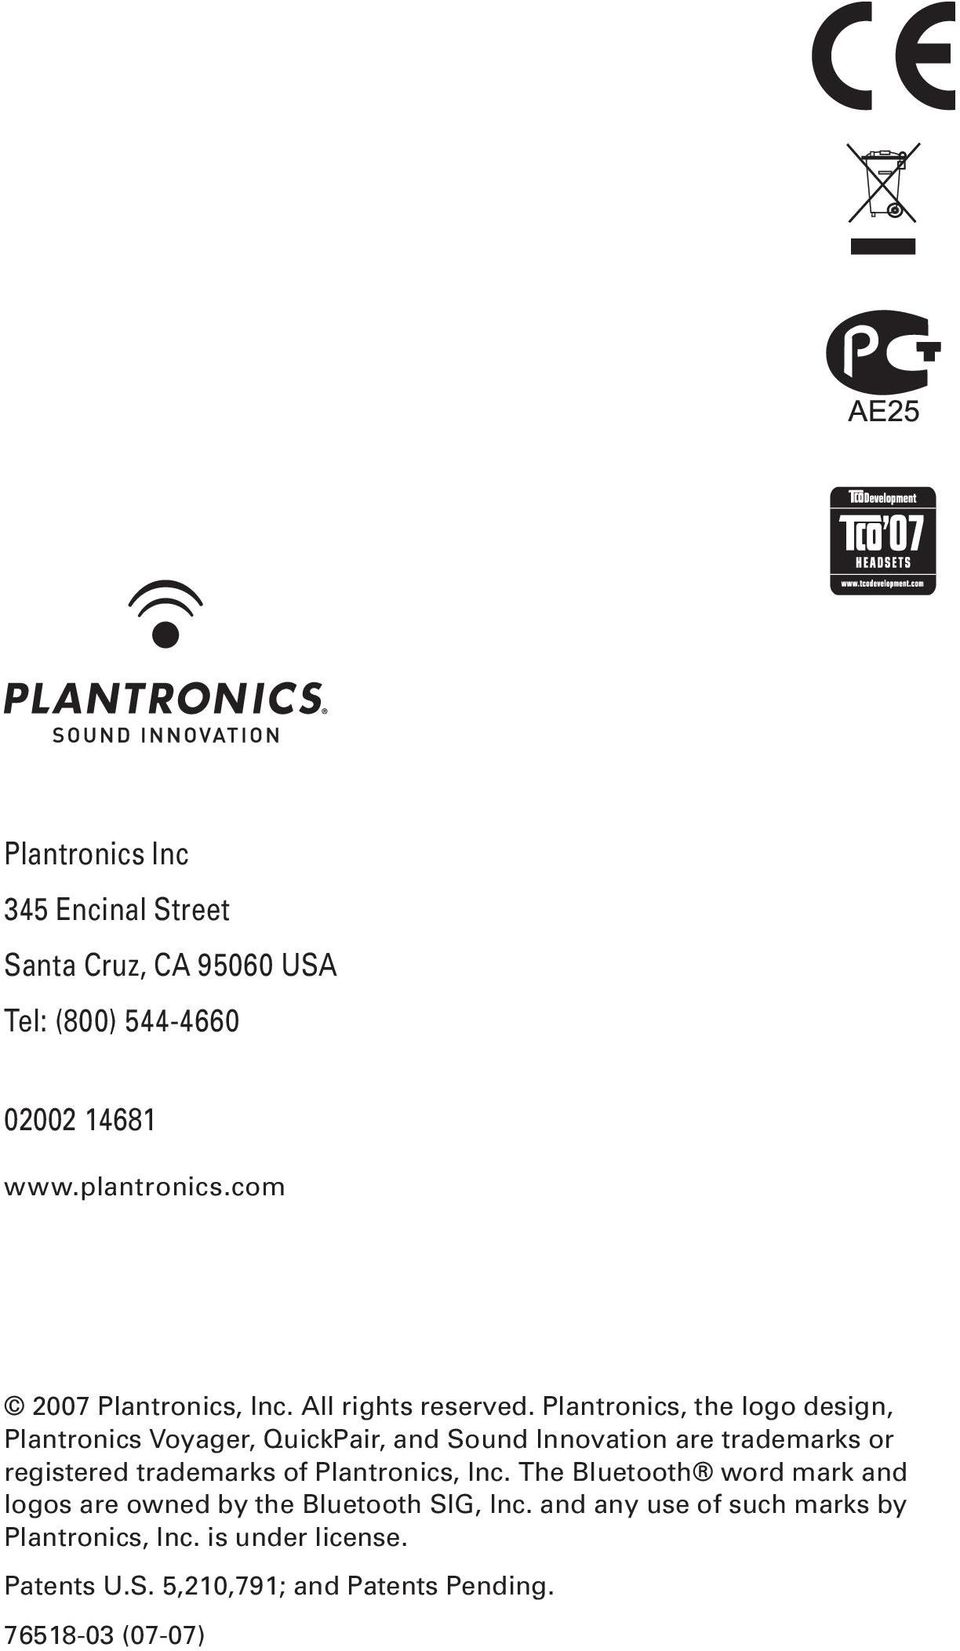 are trademarks or registered trademarks of Plantronics, Inc The Bluetooth word mark and logos are owned by the Bluetooth